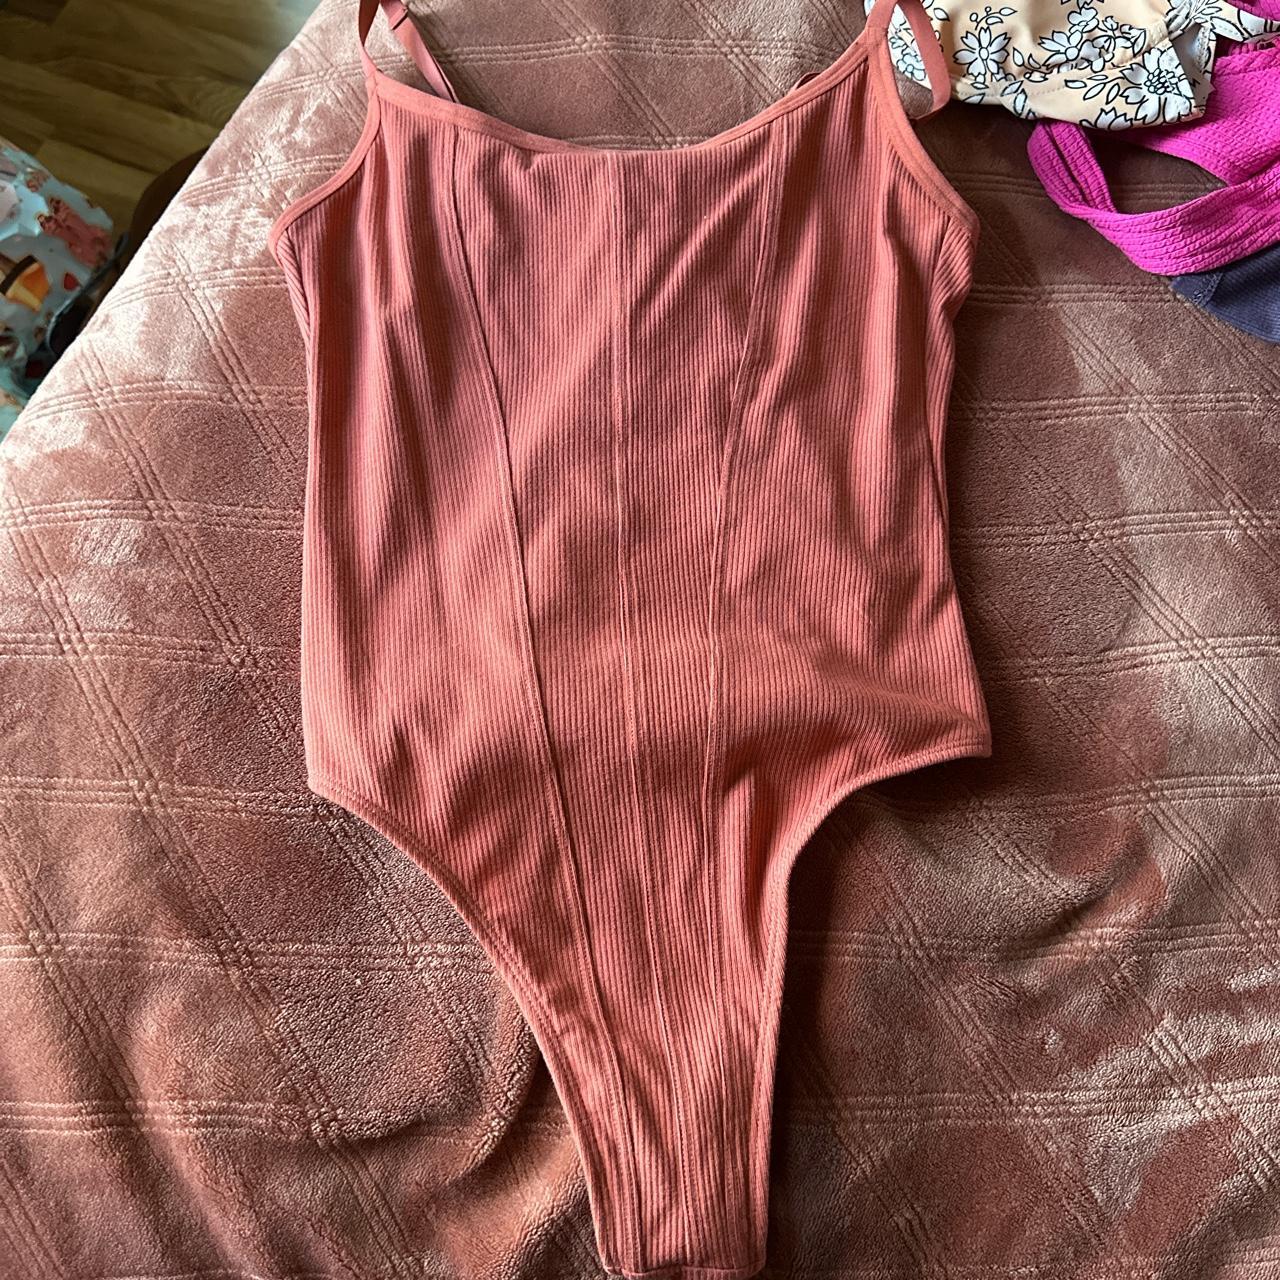 never worn colsie body suit from target size xs - Depop